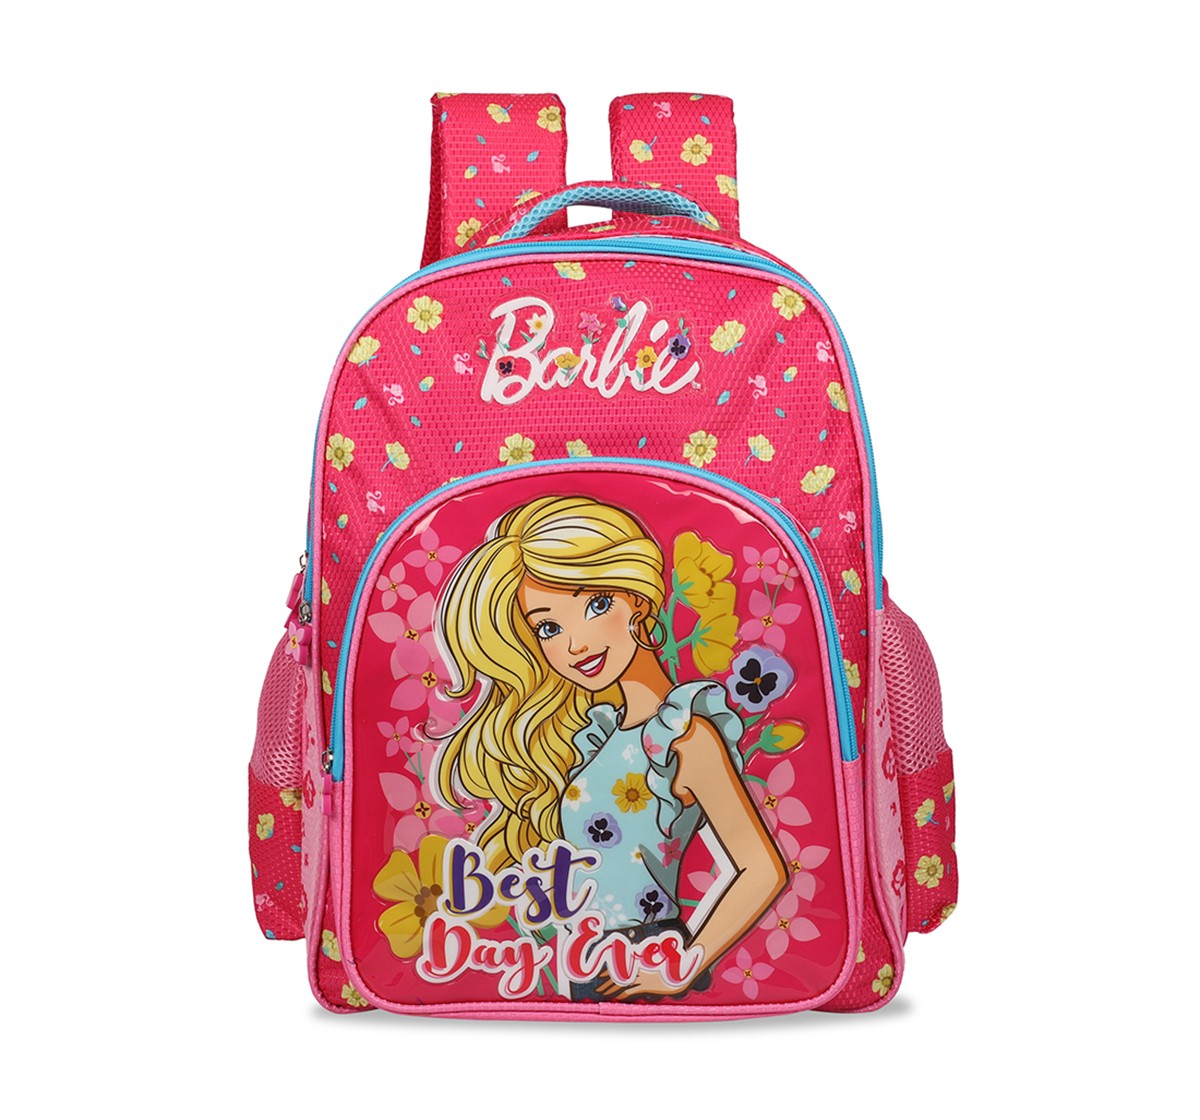 Barbie Barbie Best Day Ever Pink School Bag 41 Cm Bags for age 7Y+ (Pink)